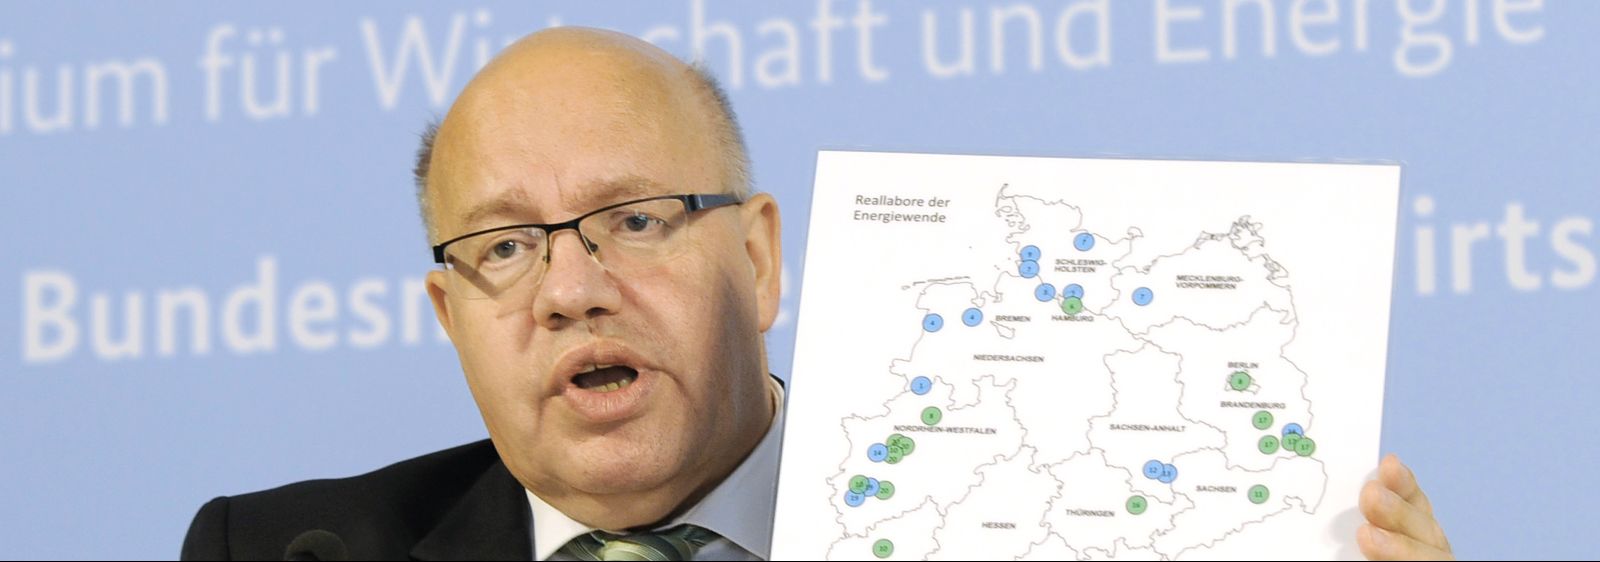 German Federal Minister for Economic Affairs and Energy Peter Altmaier has announced the winners of the “living labs for the energy transition” competition.